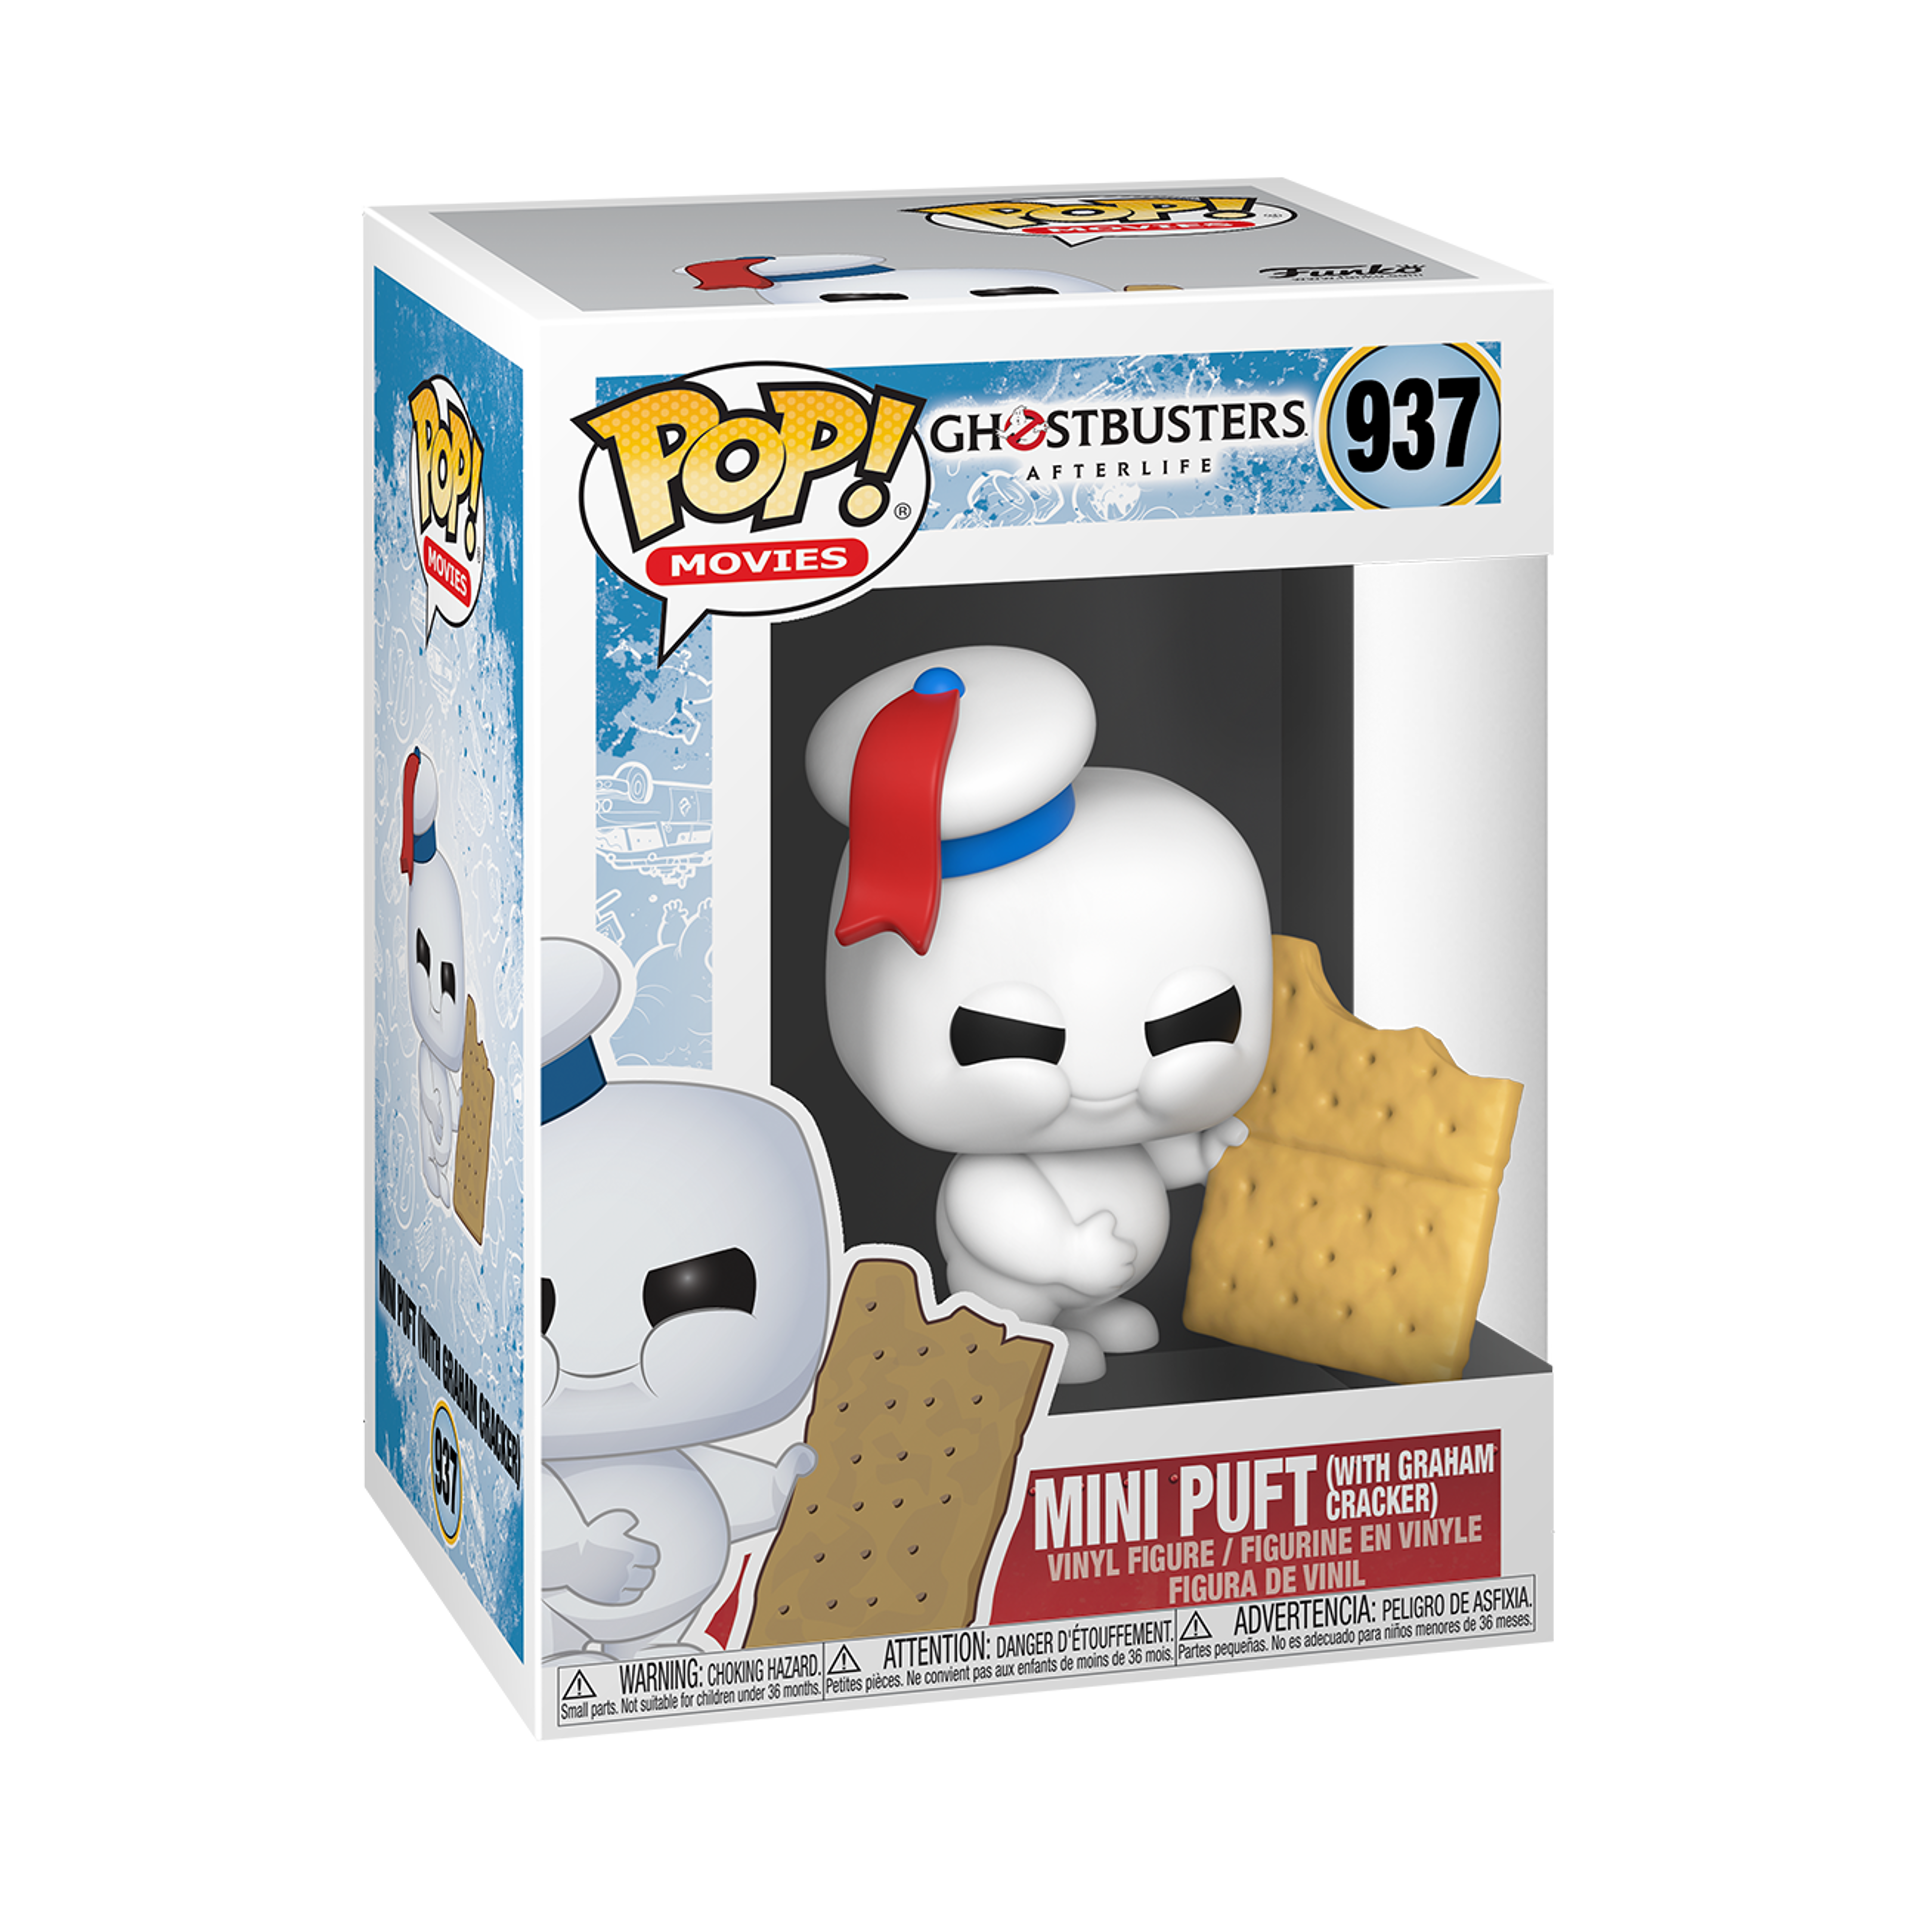 Funko Pop! Movies Ghostbusters: Afterlife - Mini Puft (with Graham Cracker)